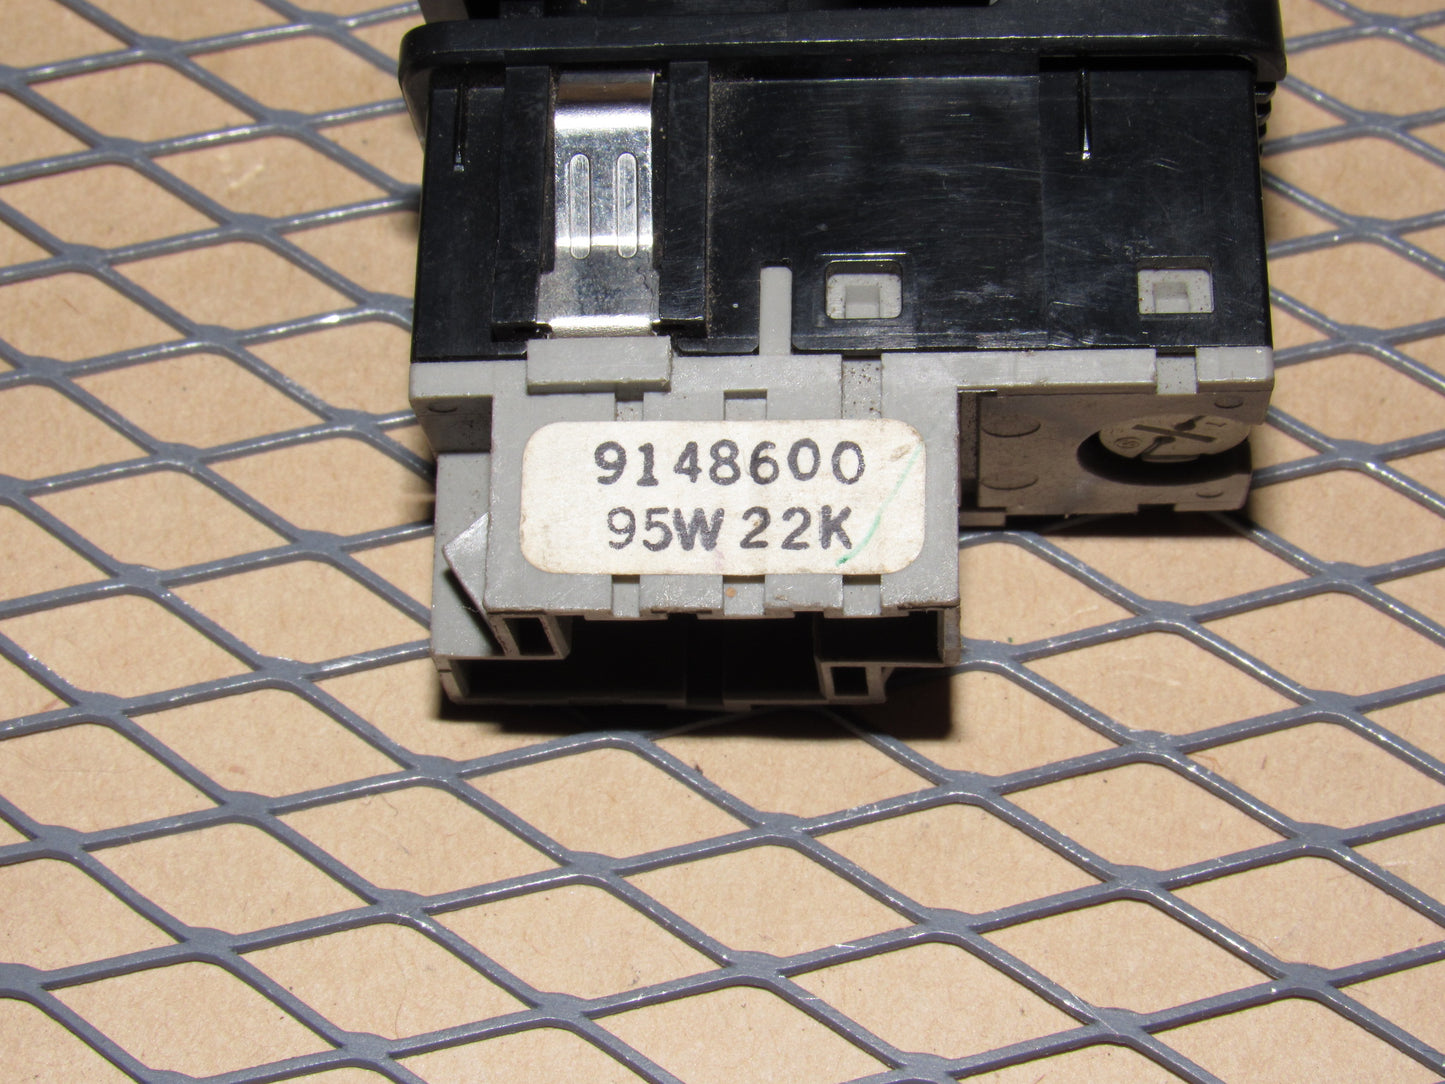 95 96 97 Volvo 850 OEM Traction Tracs Switch